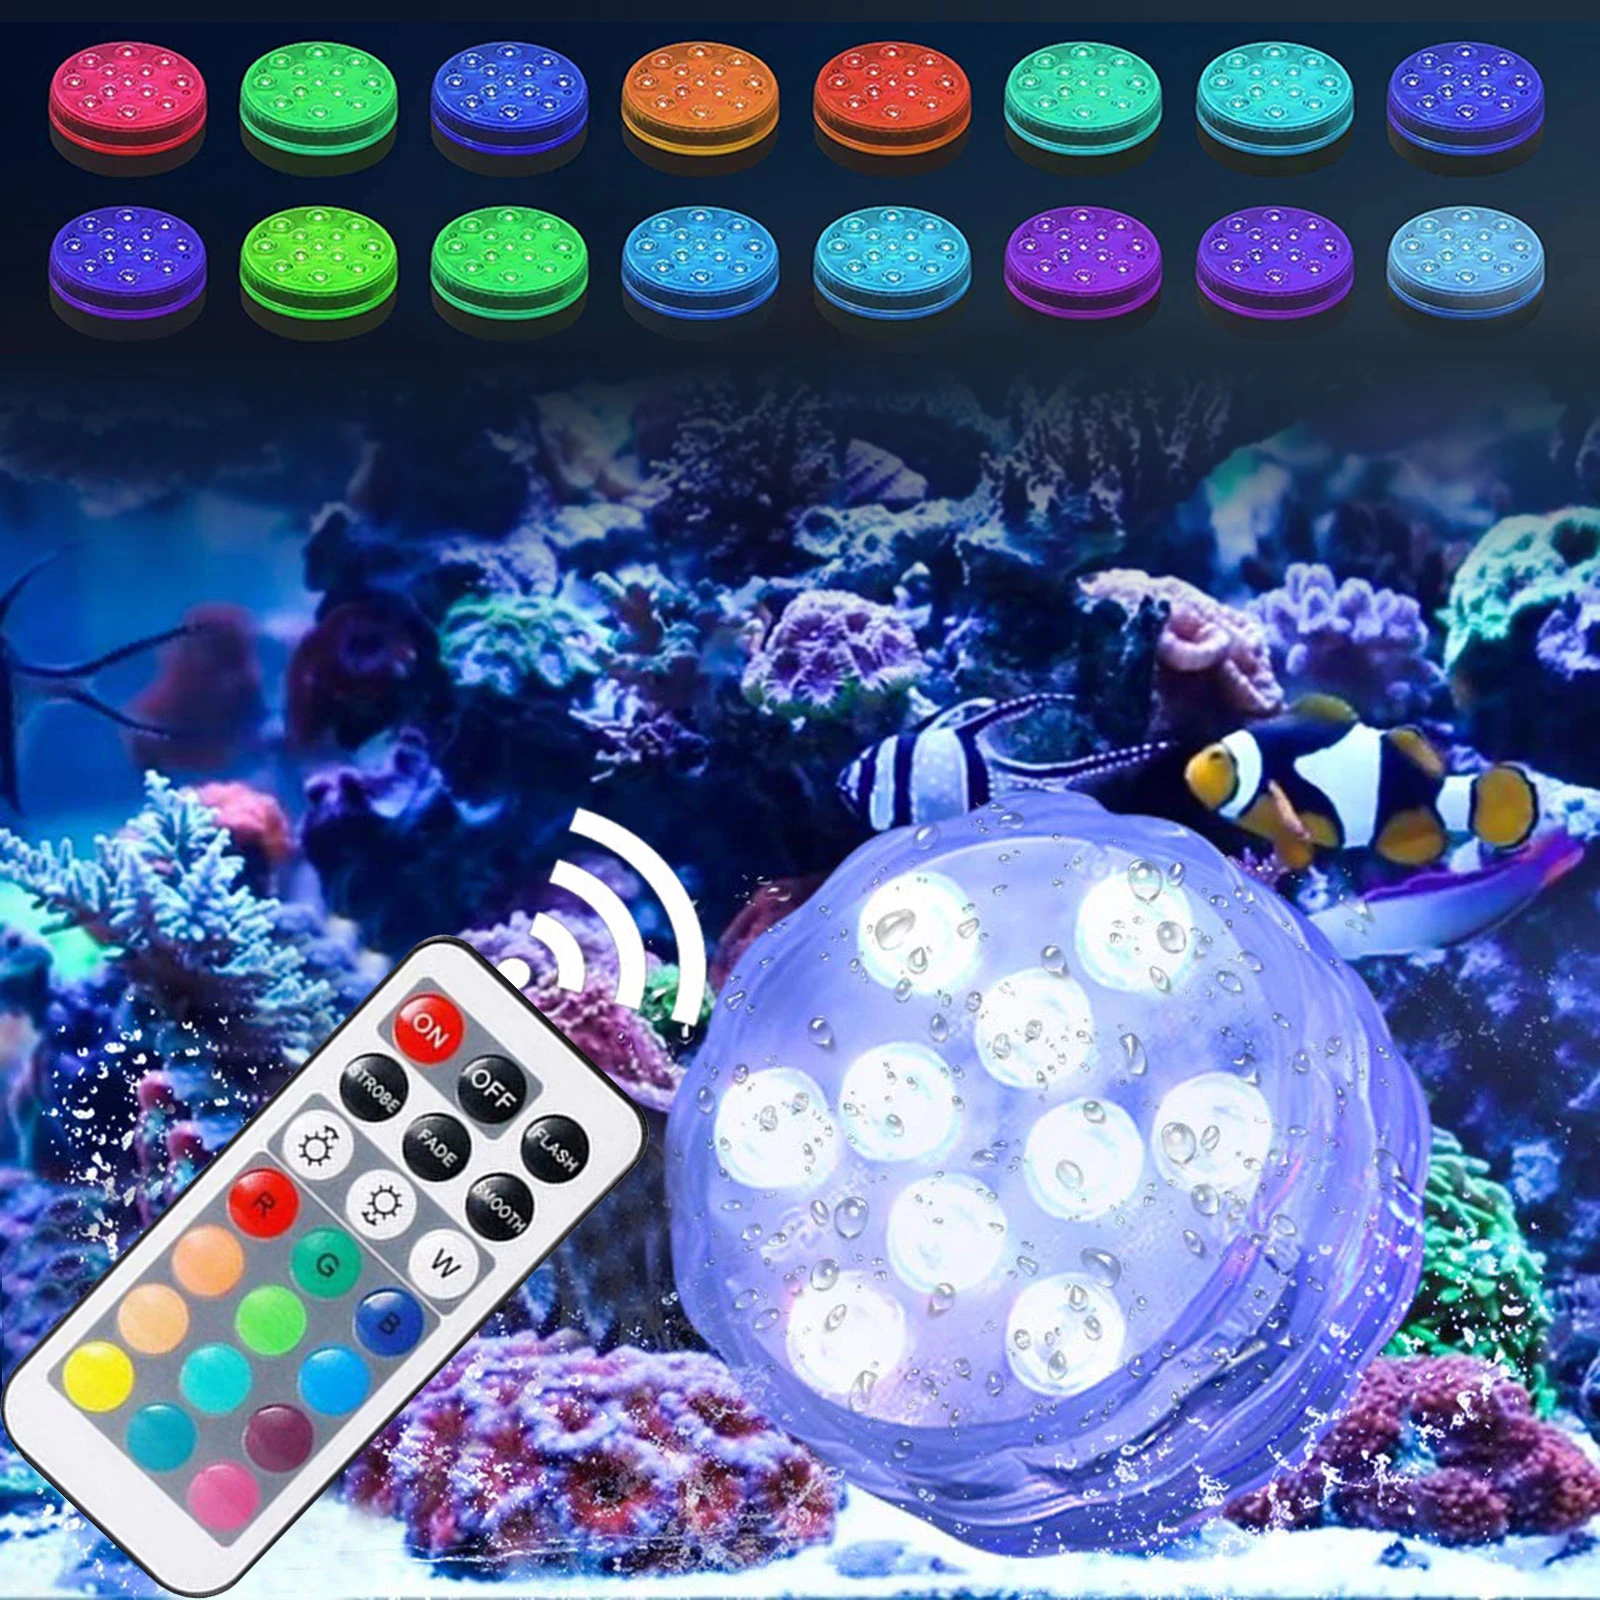 

4pcs 10 LED Submersible Colorful Light Remote Controlled RGB Underwater Lamp Swimming Pool Garden Decoration Lanscape Light